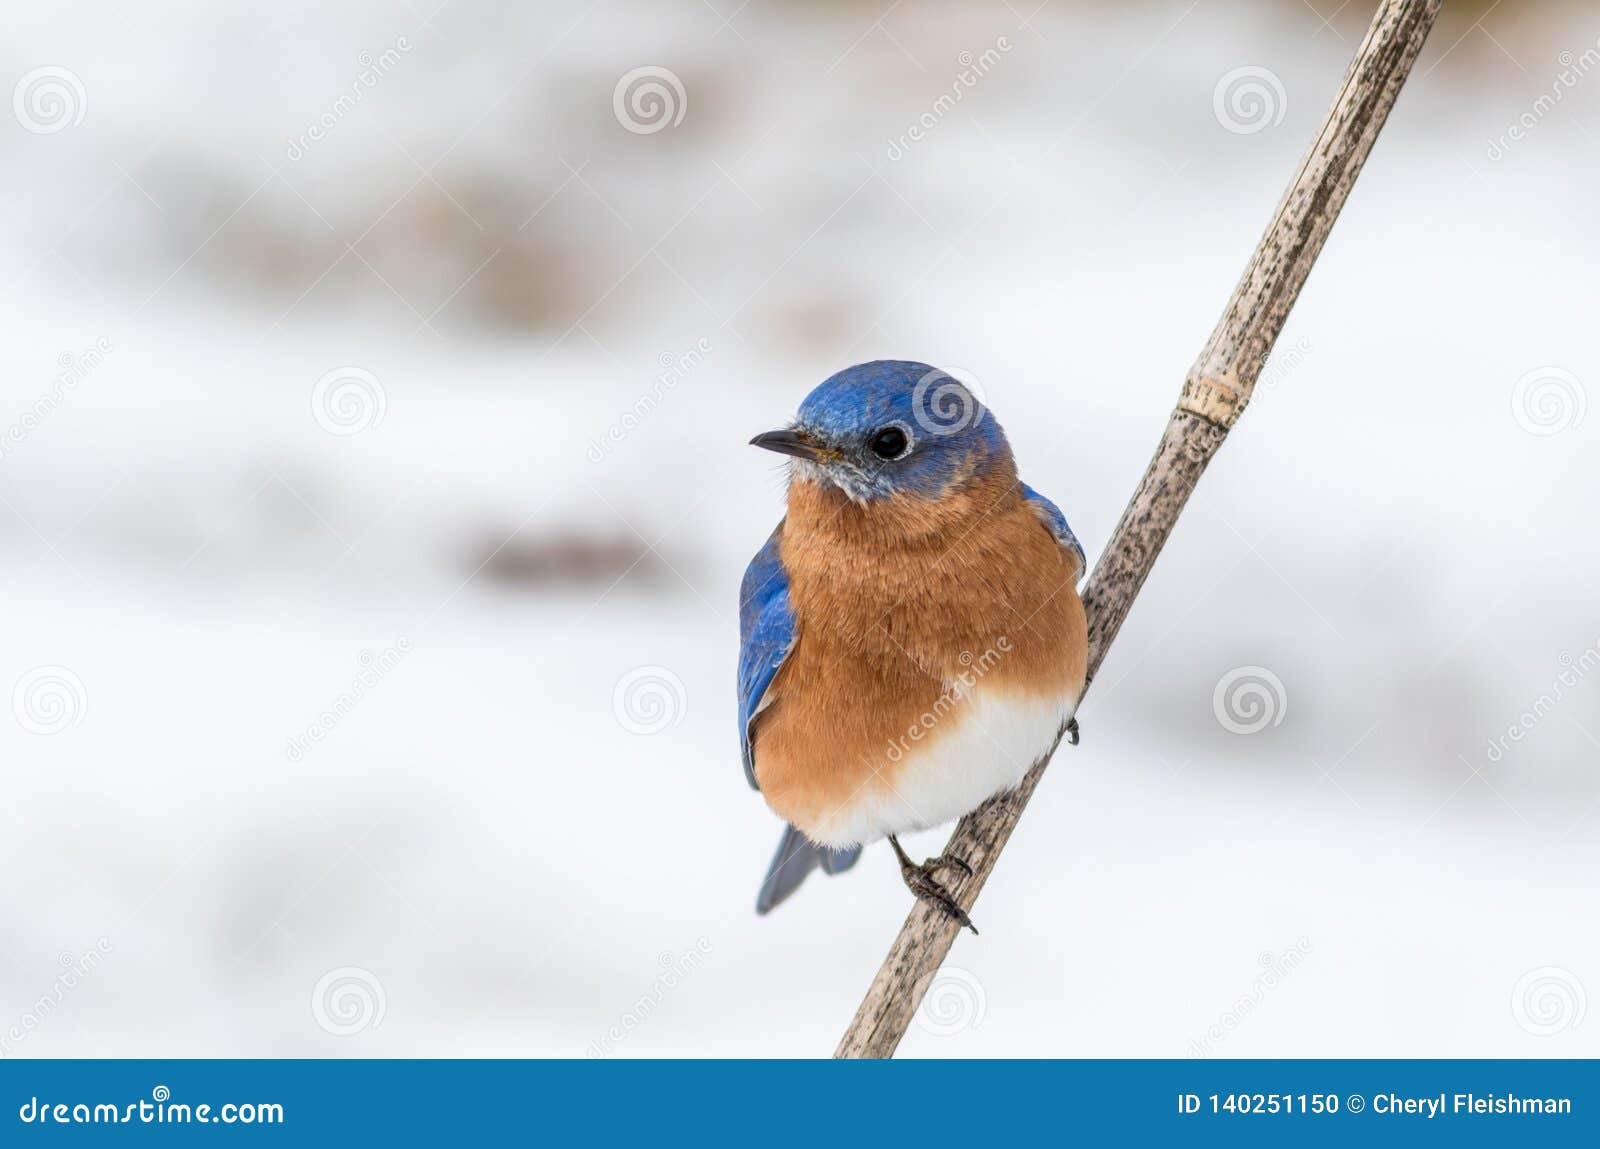 eastern bluebird male perched in february with snow on the ground